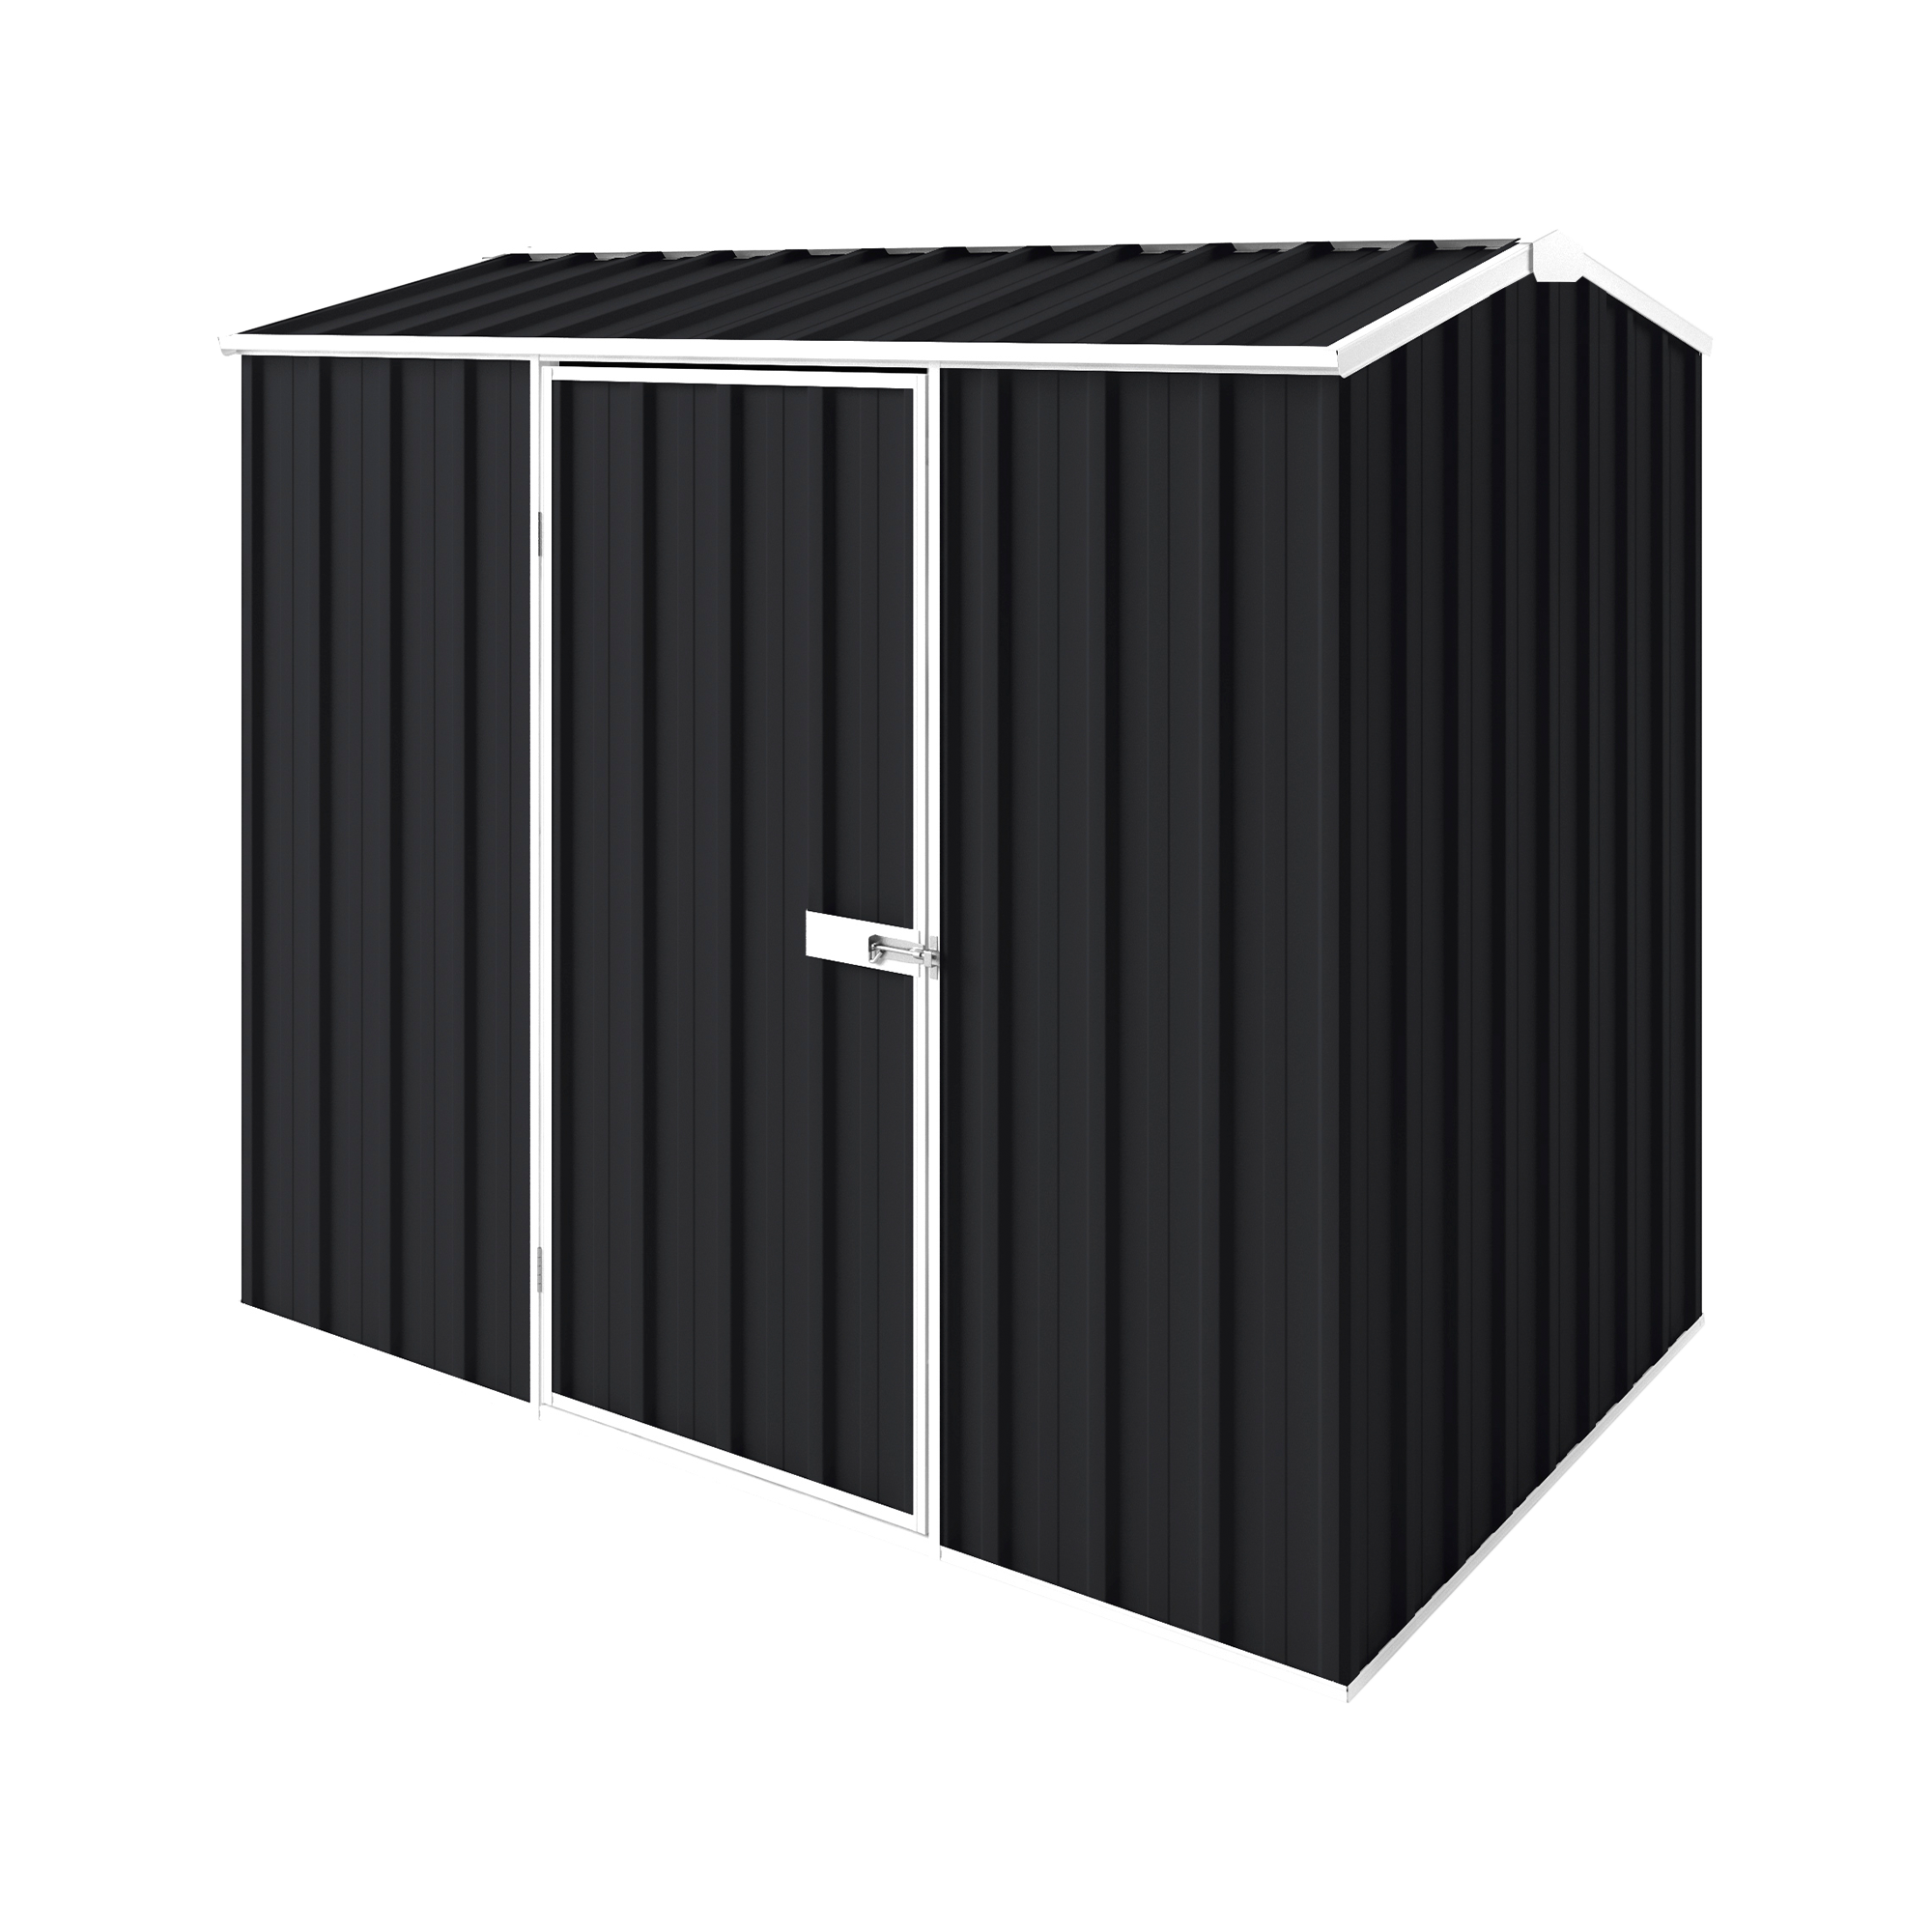 2.25m x 1.5m Gable Roof Garden Shed - EasyShed